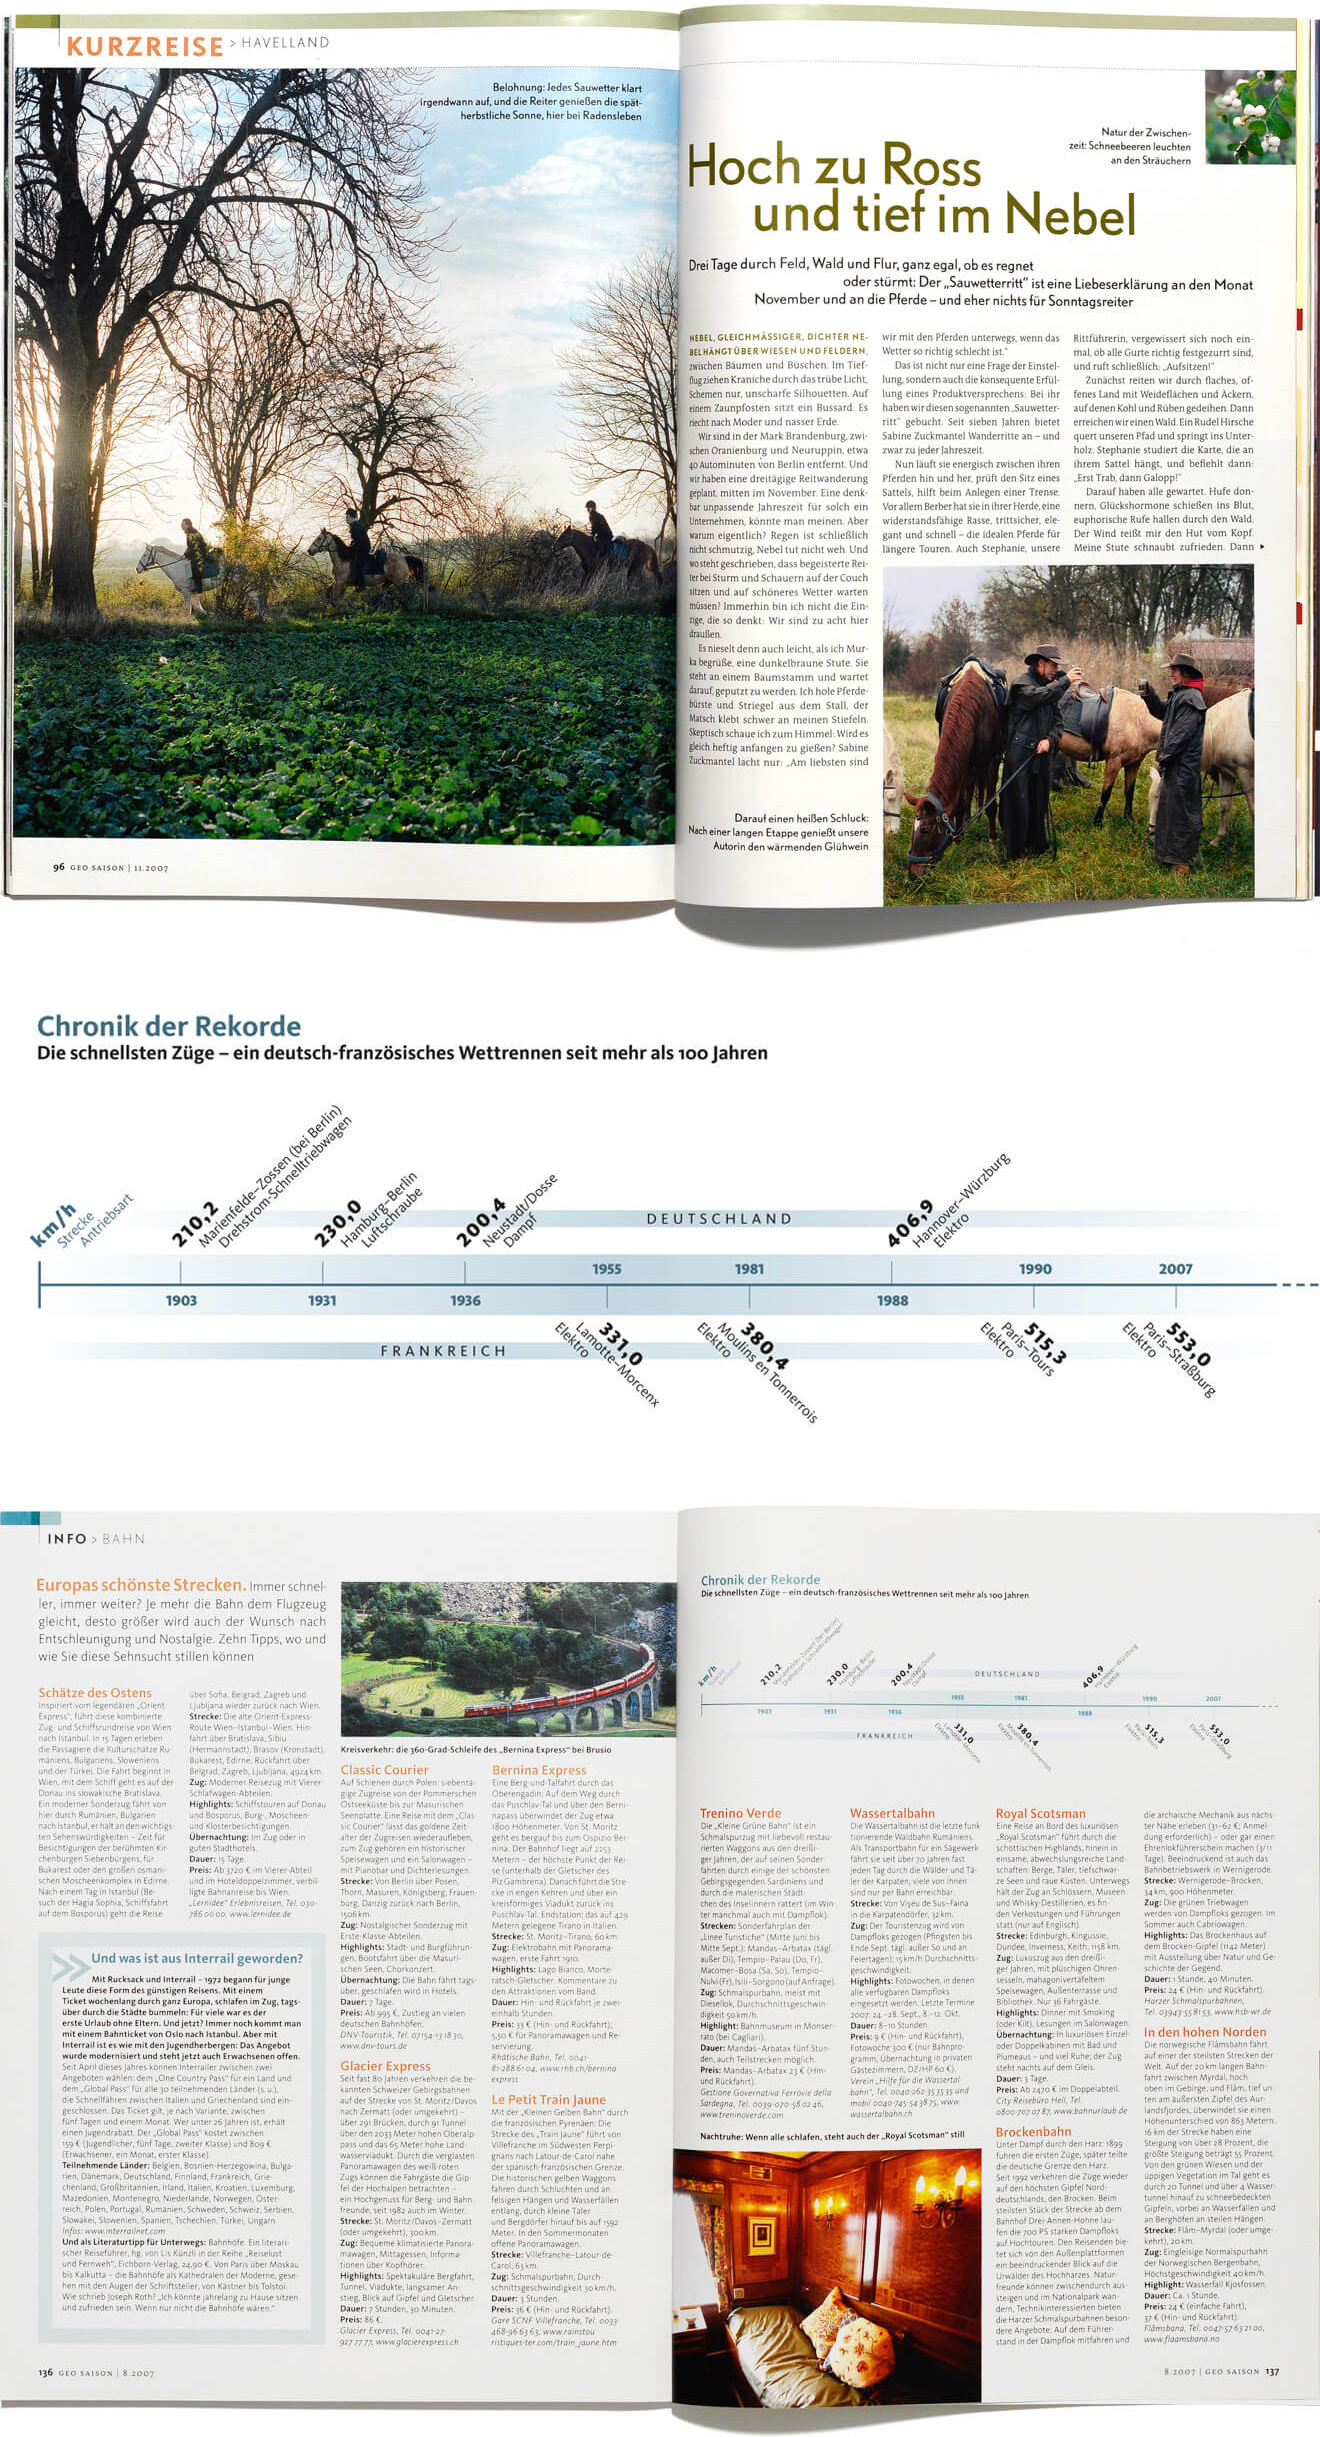 Layouts and infographic for the travel magazine “GEO Saison”.